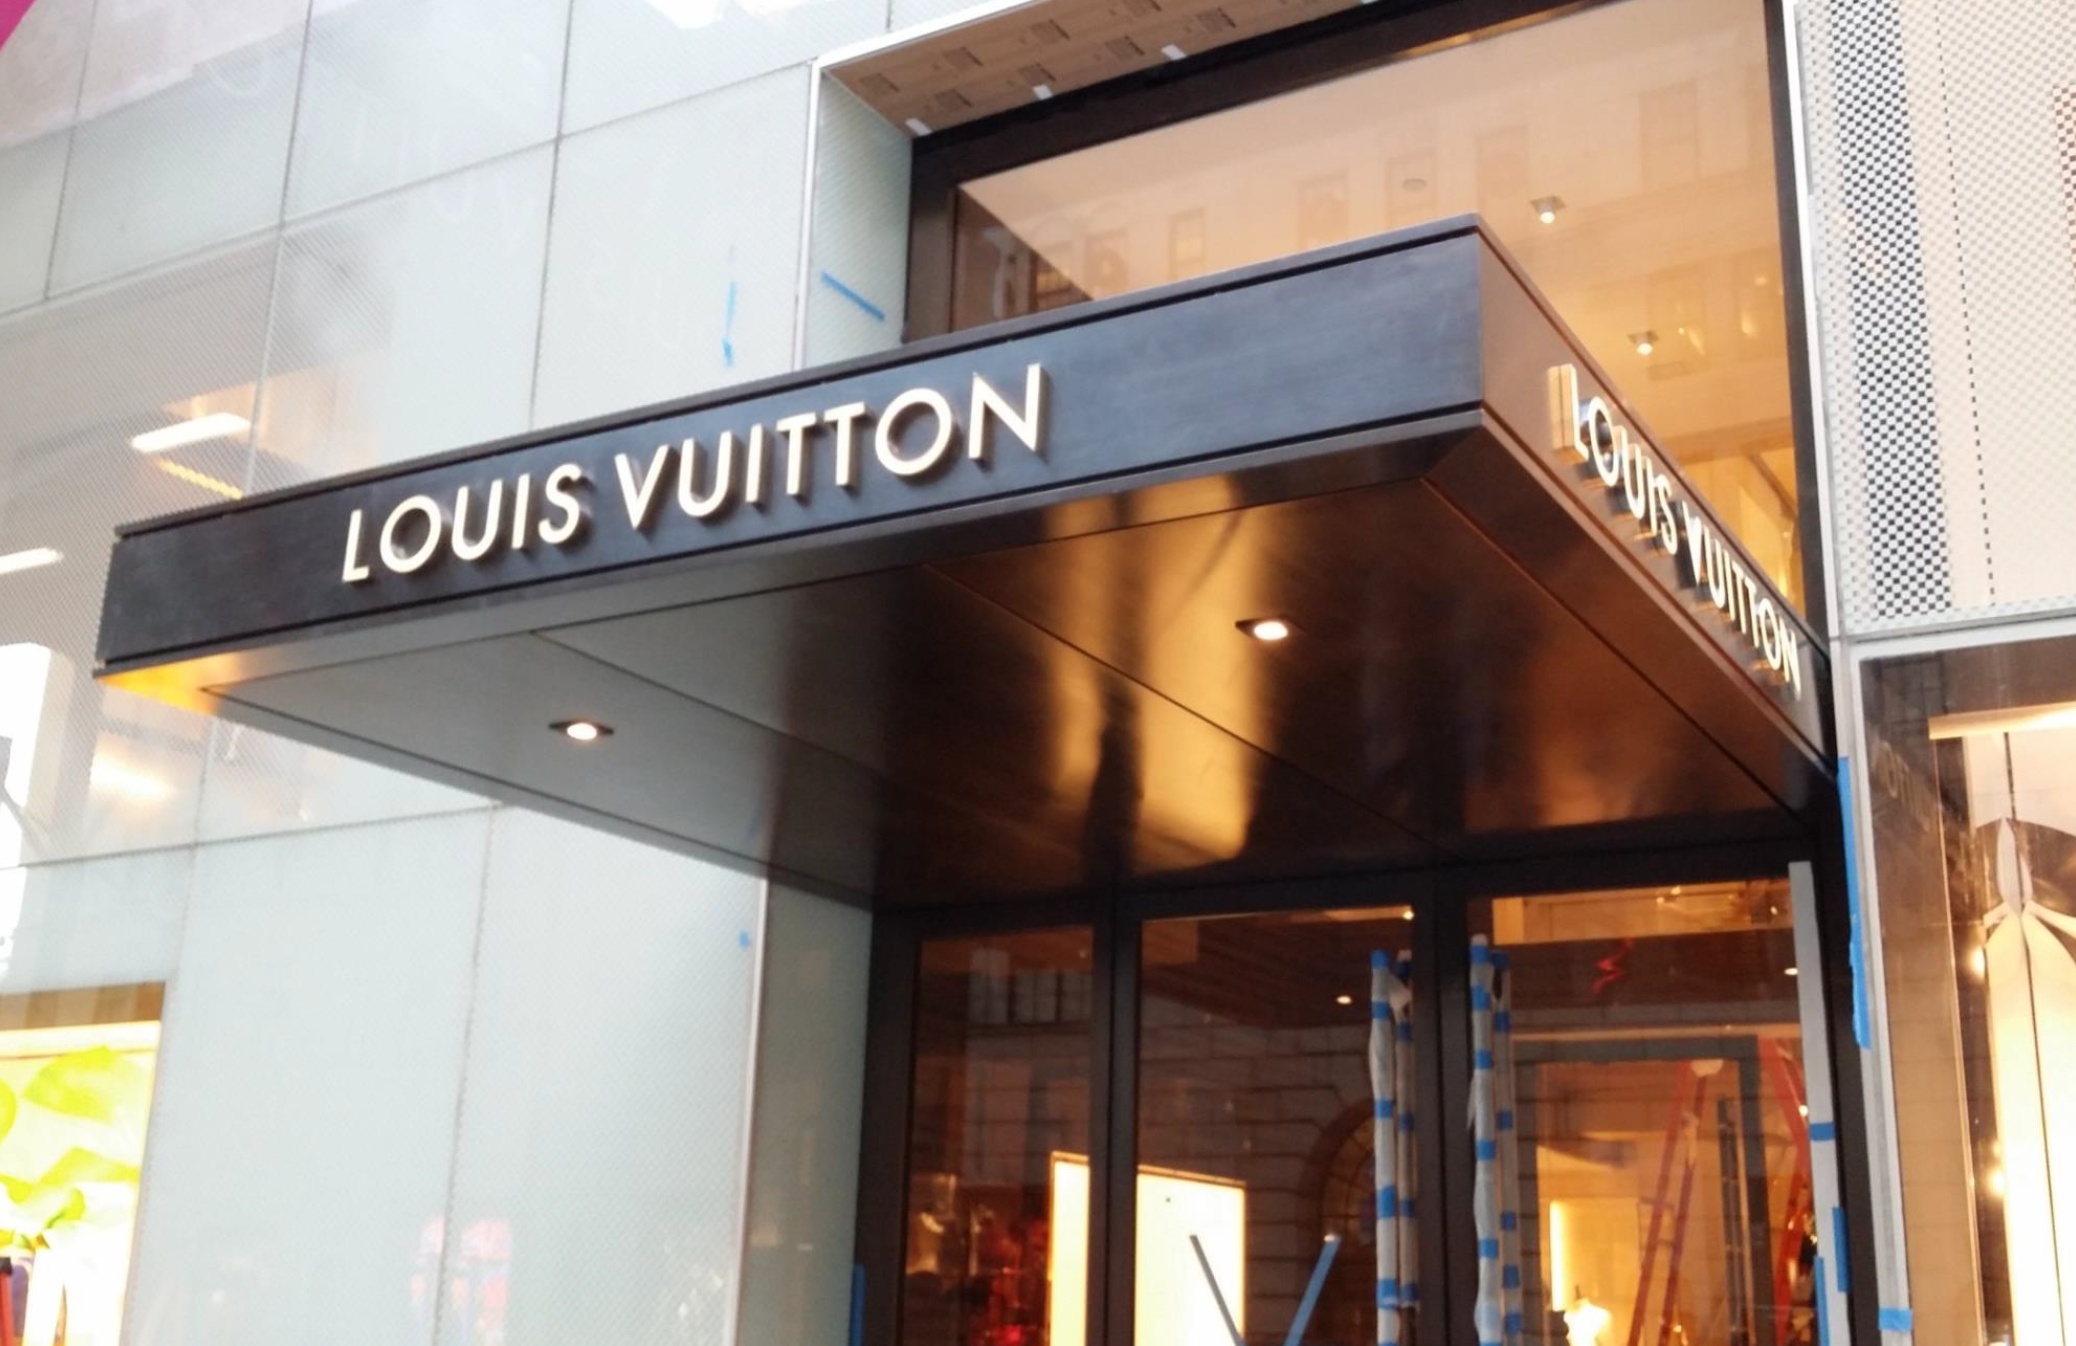 Out and About in 5th Ave. Louis Vuitton building decoration. The changing  face.